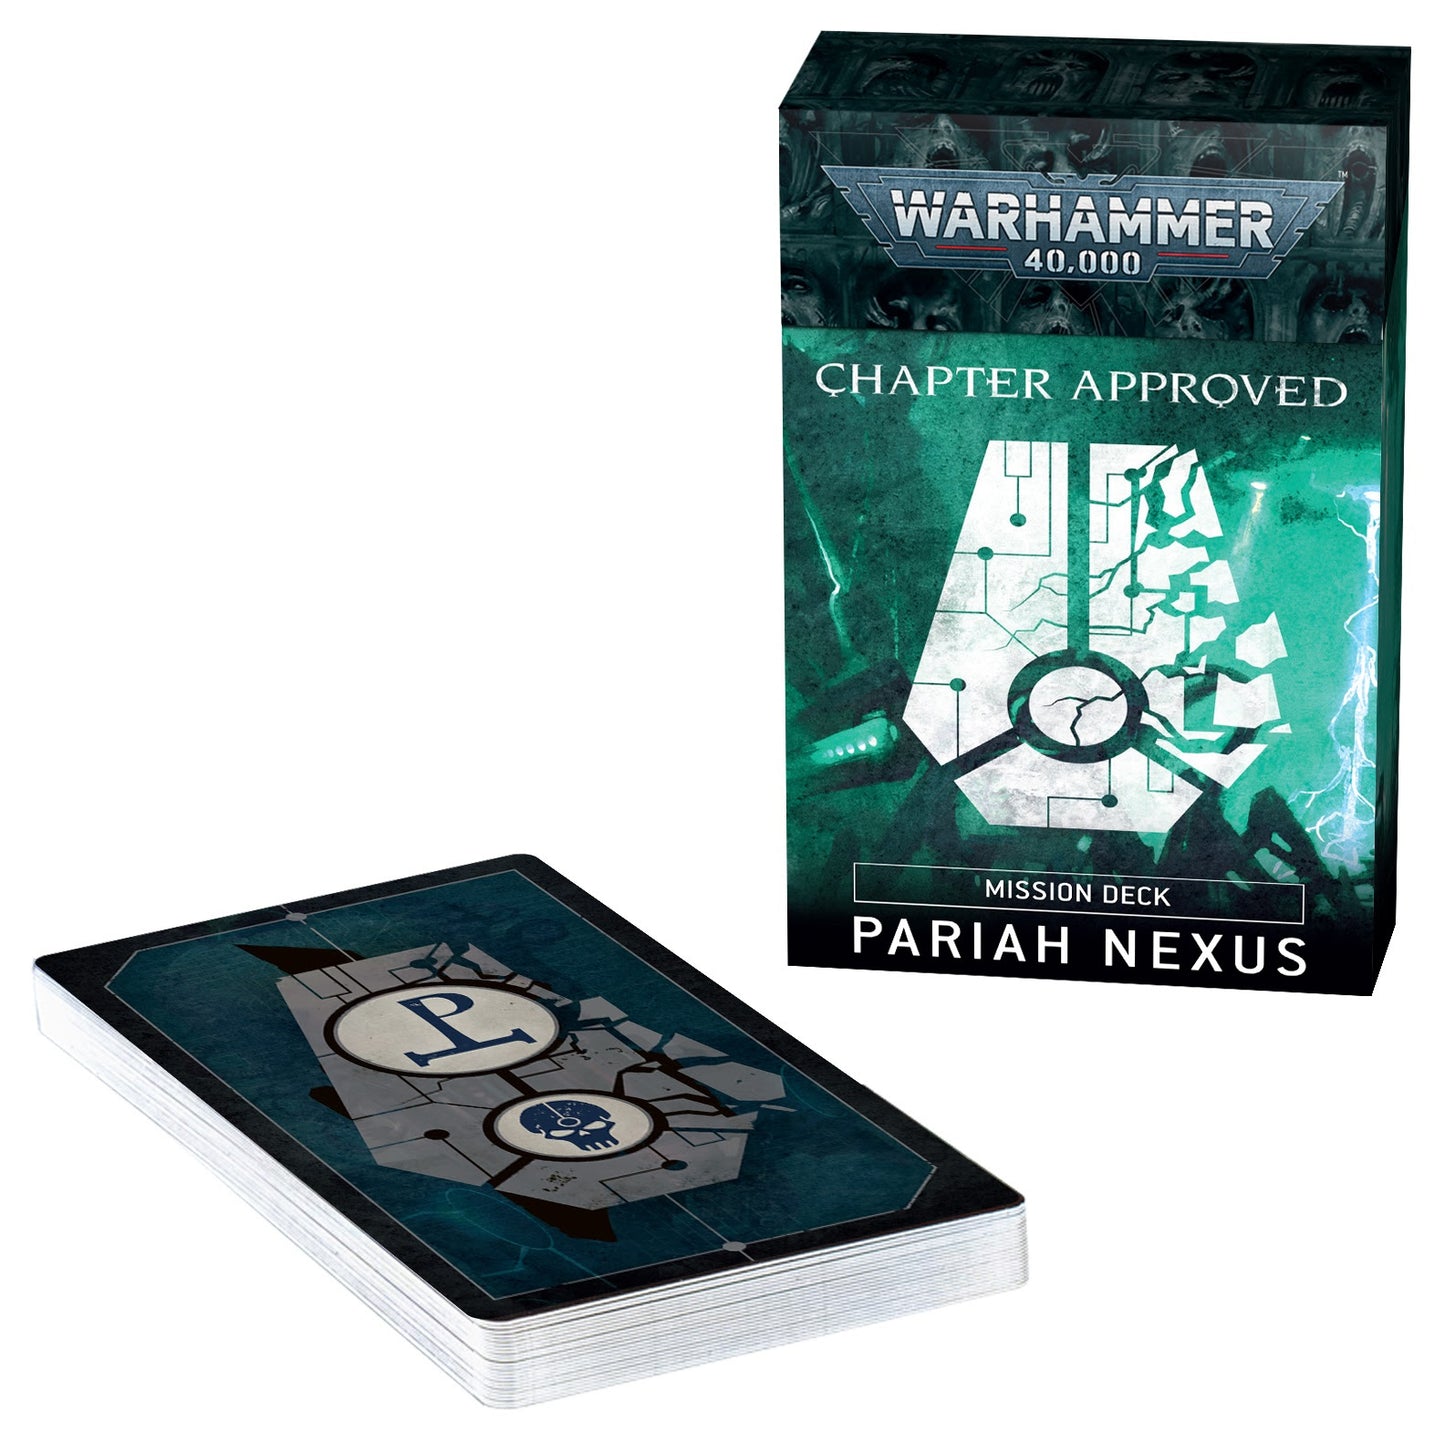 CHAPTER APPROVED PARIAH NEXUS MISSON DECK (CHN)